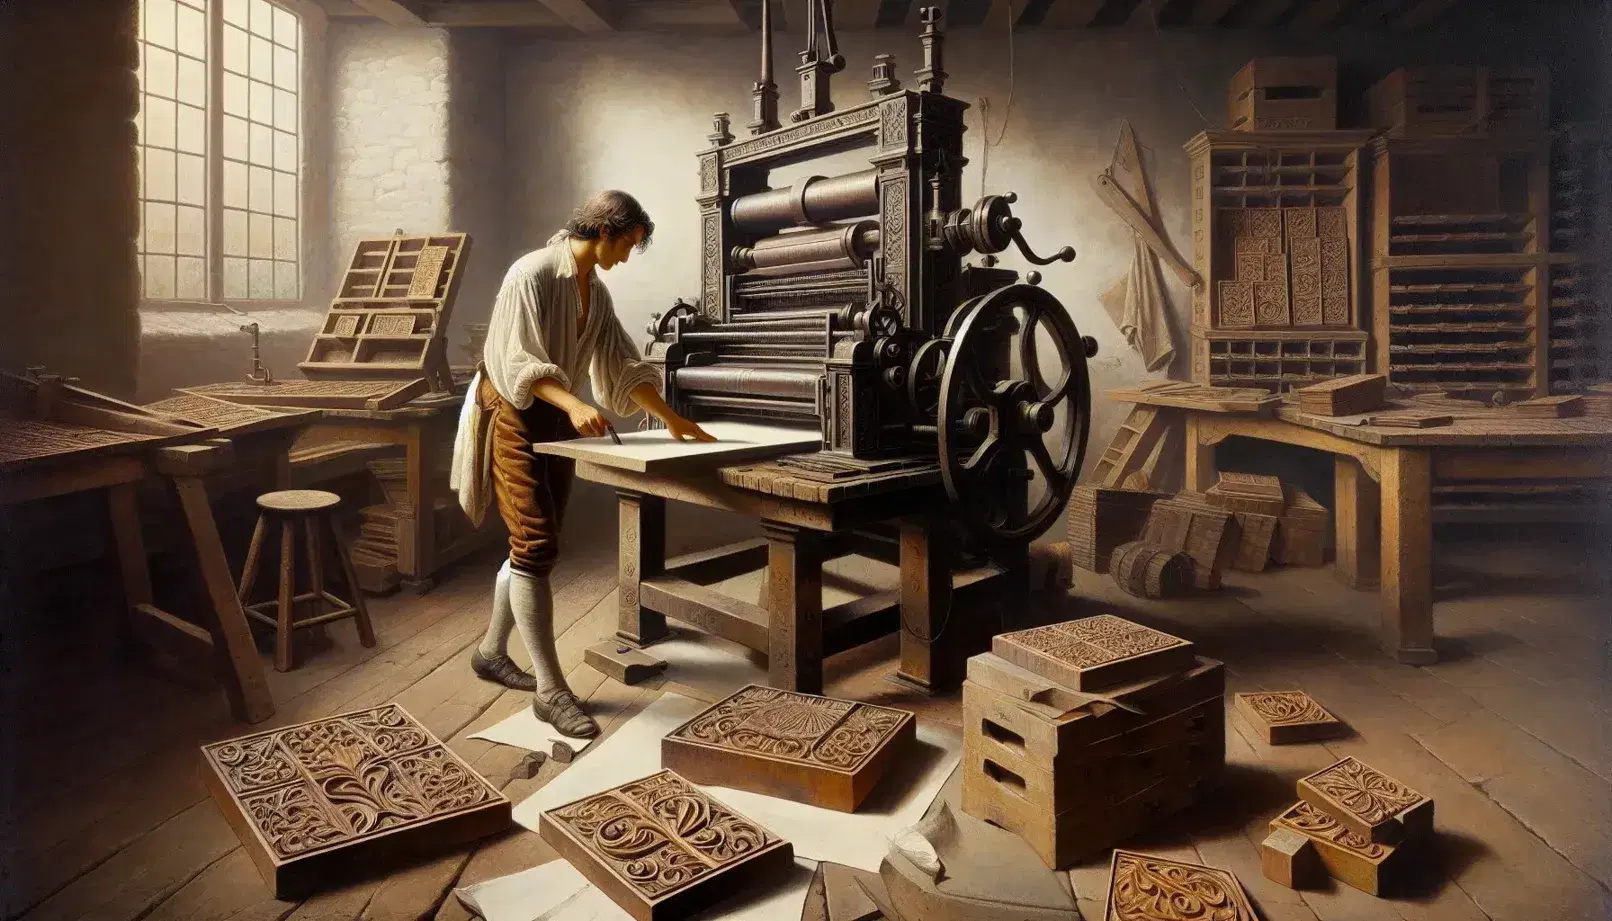 18th-century printing press operation with a man in period clothing, detailed hand-carved blocks on a table, in a stone-walled workshop.